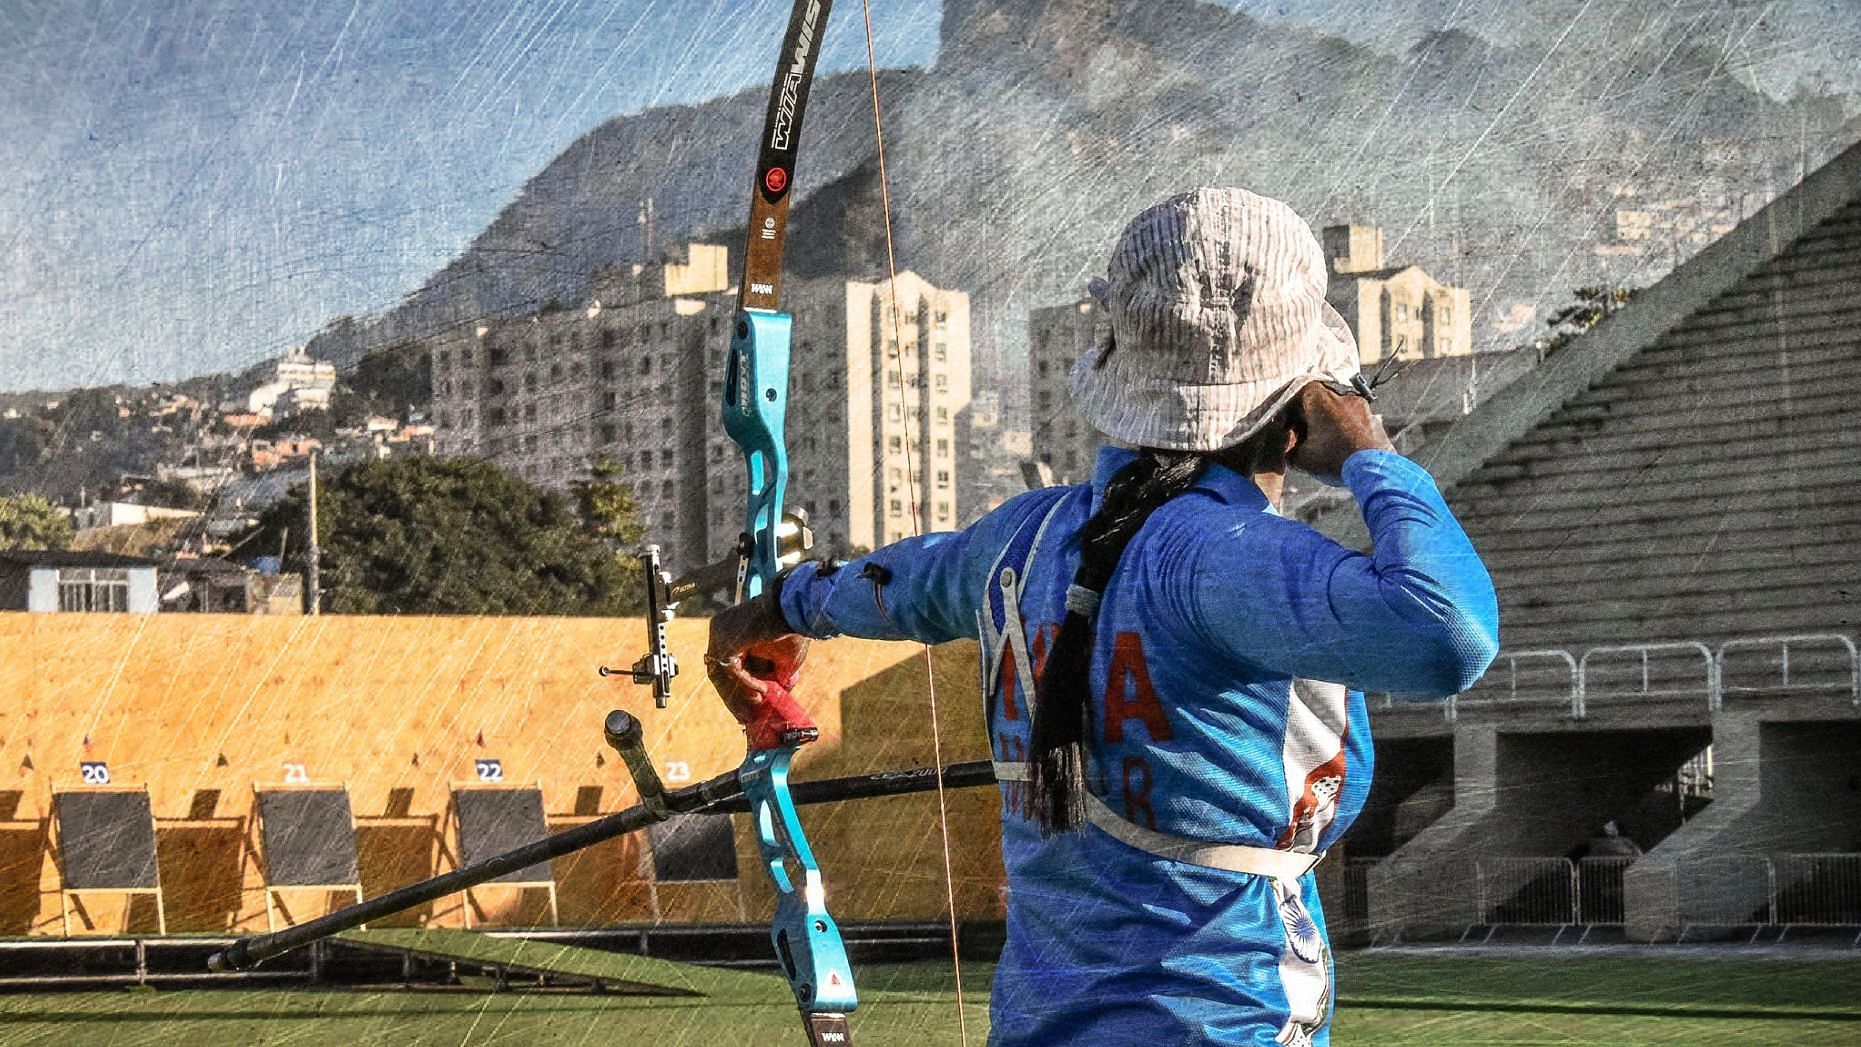 The much-awaited elections of the Archery Association of India (AAI) will be held on 18 January at the Jawaharlal Nehru Stadium in New Delhi.